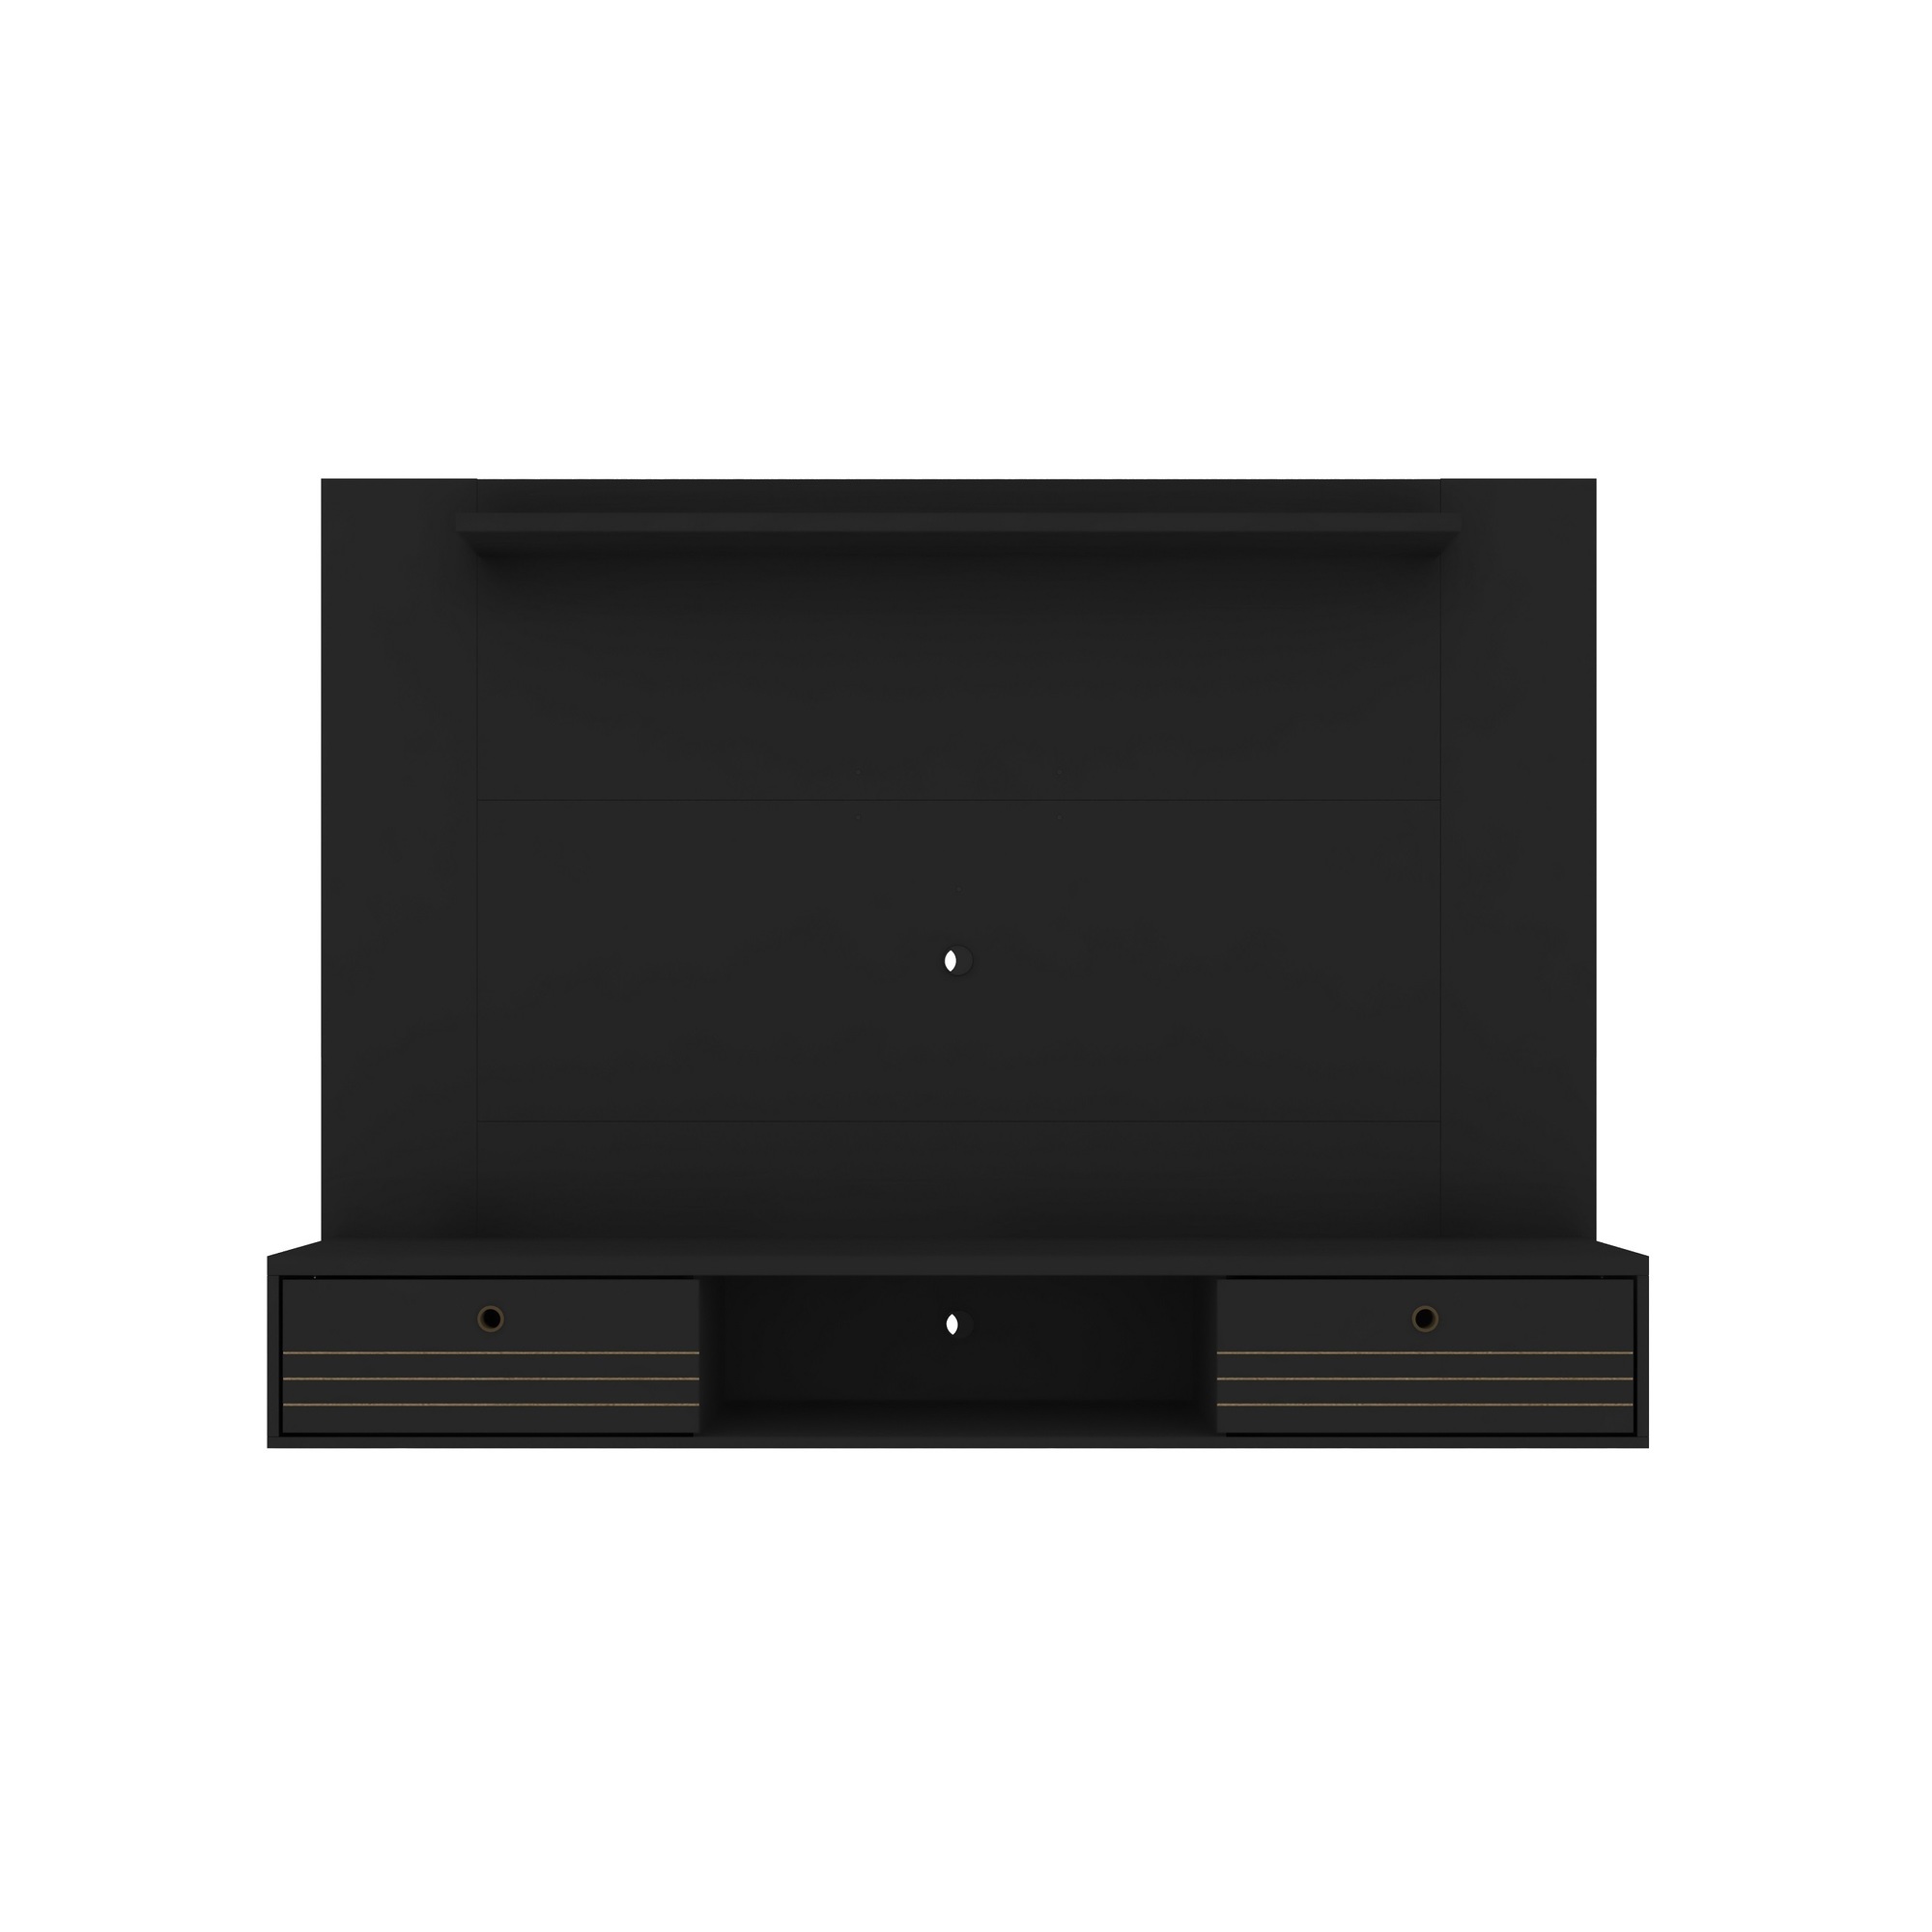 Manhattan Comfort, Liberty 70.86 Floating Wall Ent Cntr Black, Width 70.86 in, Height 52.95 in, Depth 12.99 in, Model 235BMC